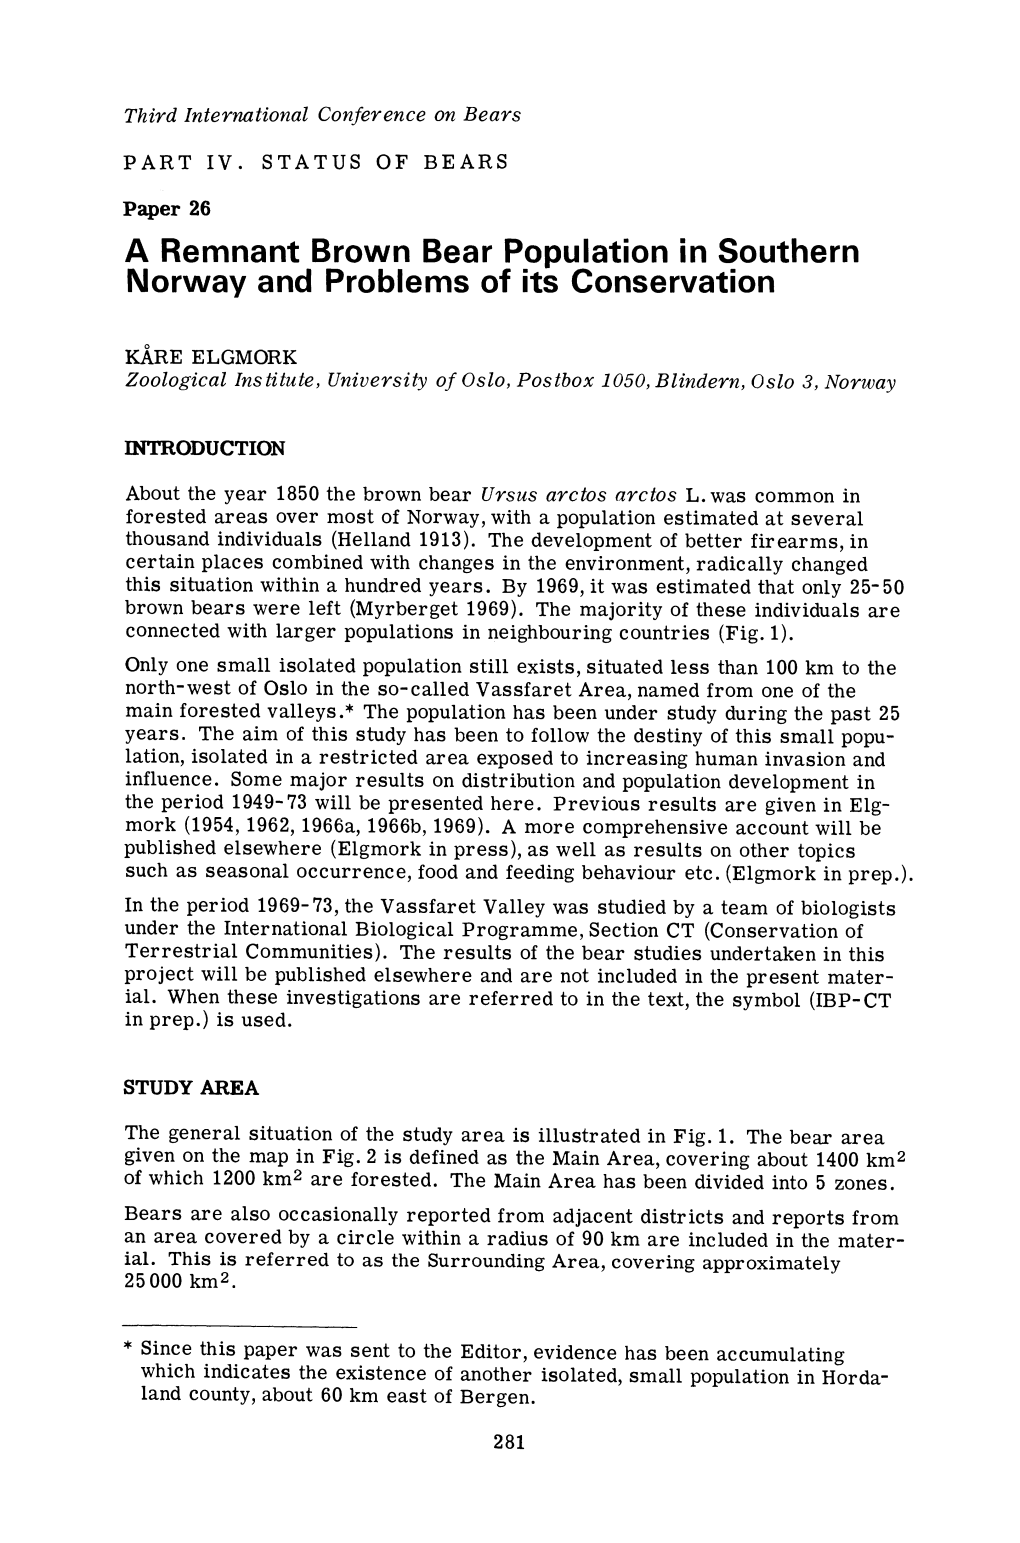 A Remnant Brown Bear Population in Southern Norway and Problems of Its Conservation